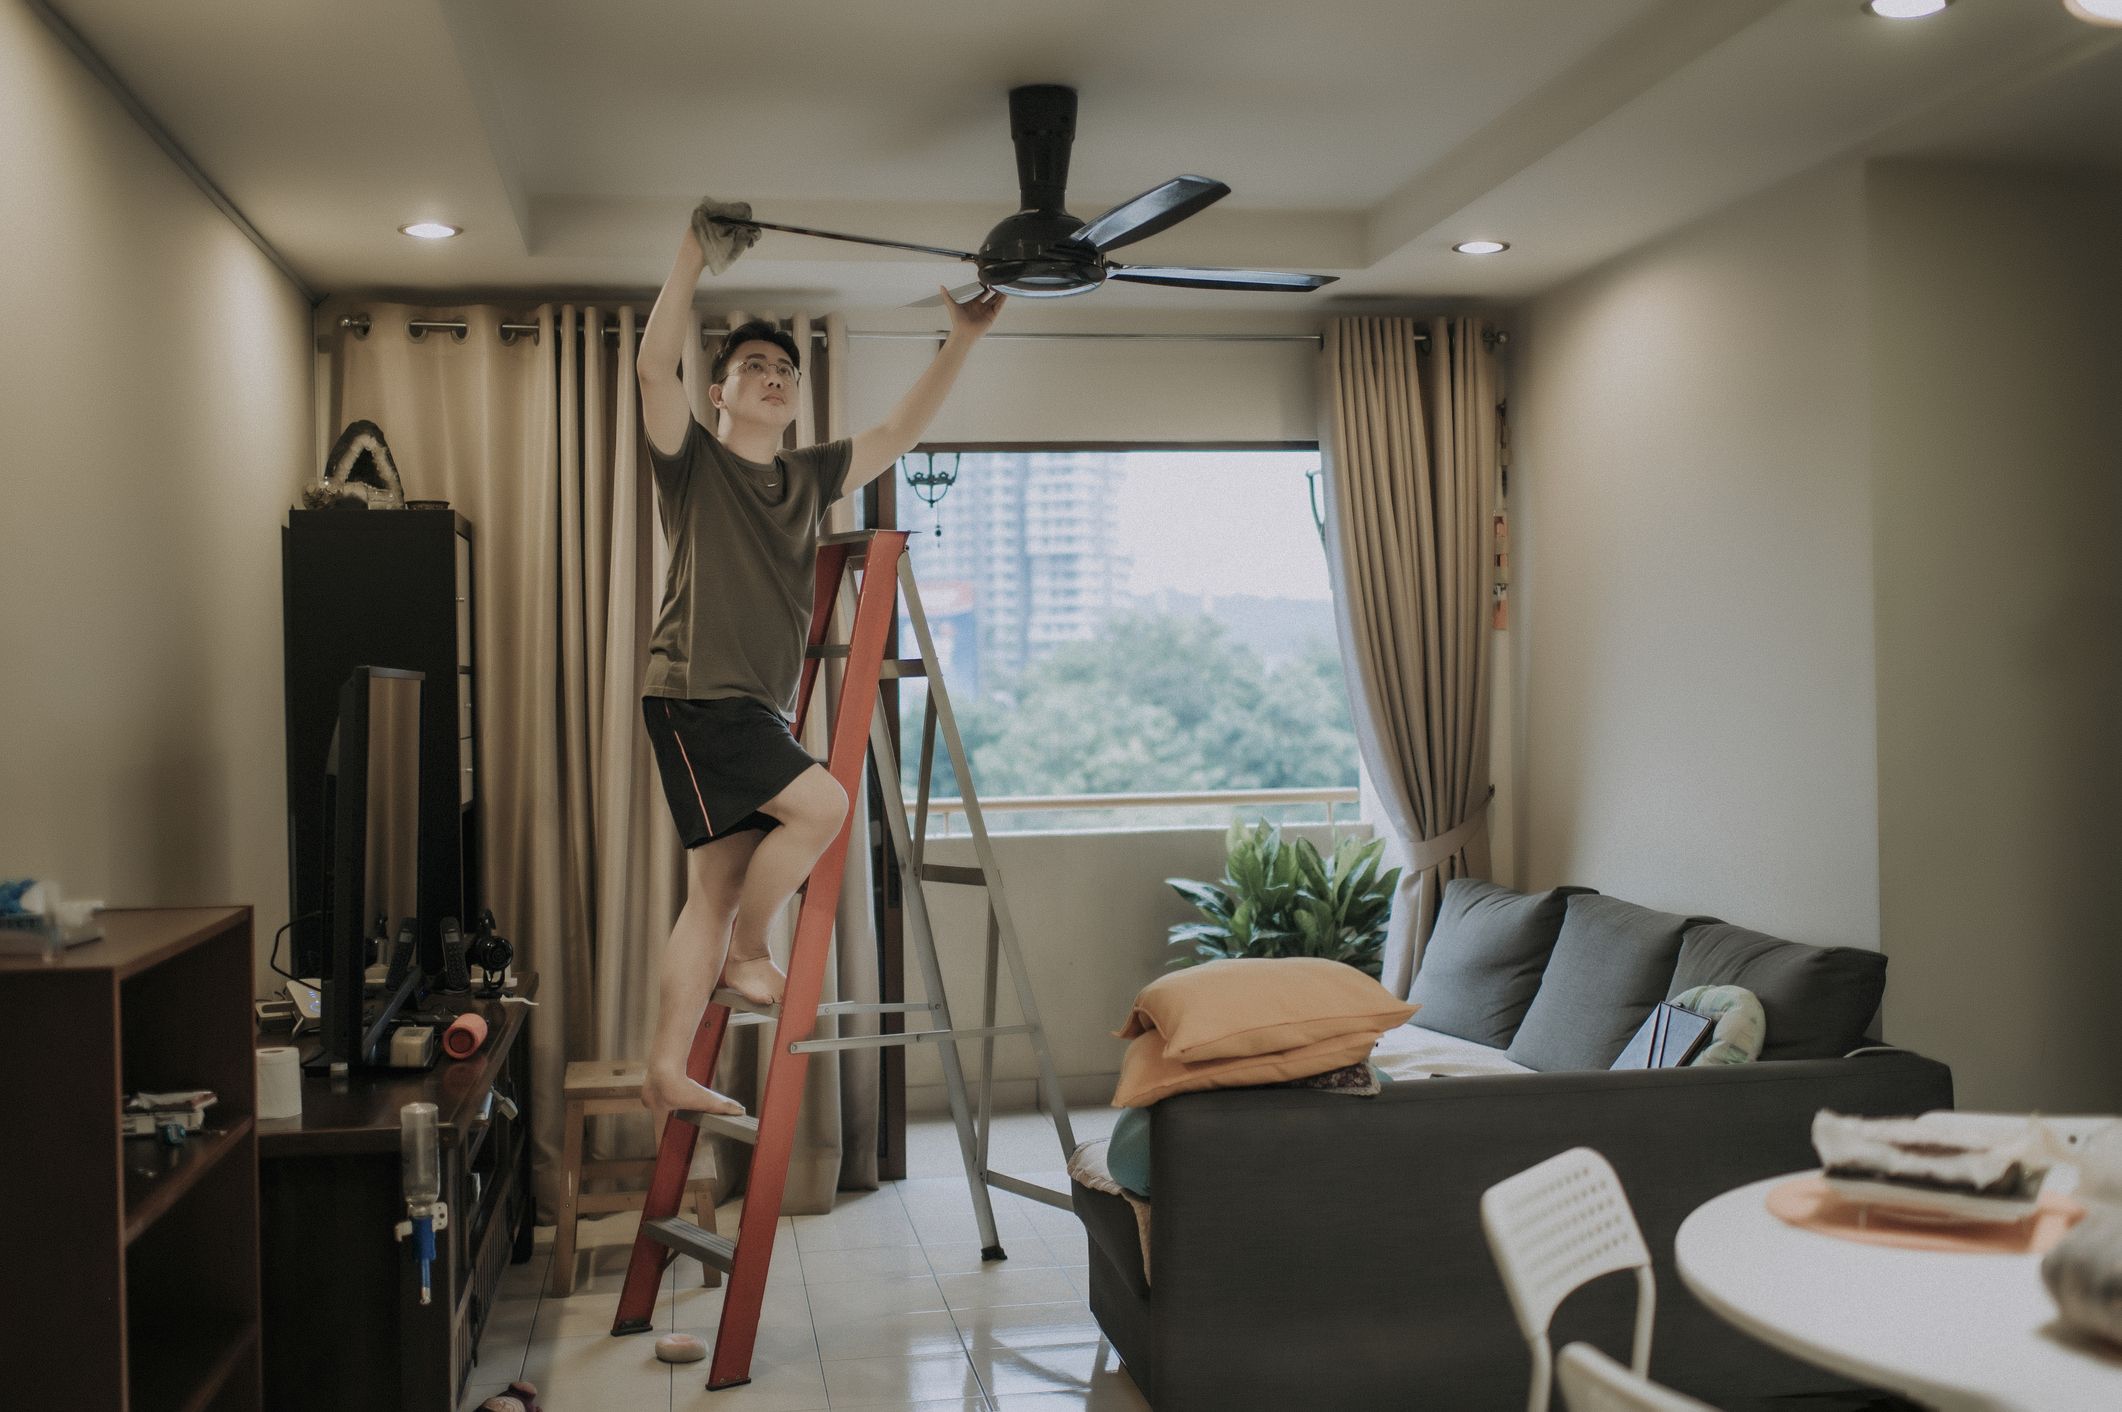 https://hips.hearstapps.com/hmg-prod/images/an-asian-chinese-male-cleaning-ceiling-fan-at-home-royalty-free-image-1619537903.